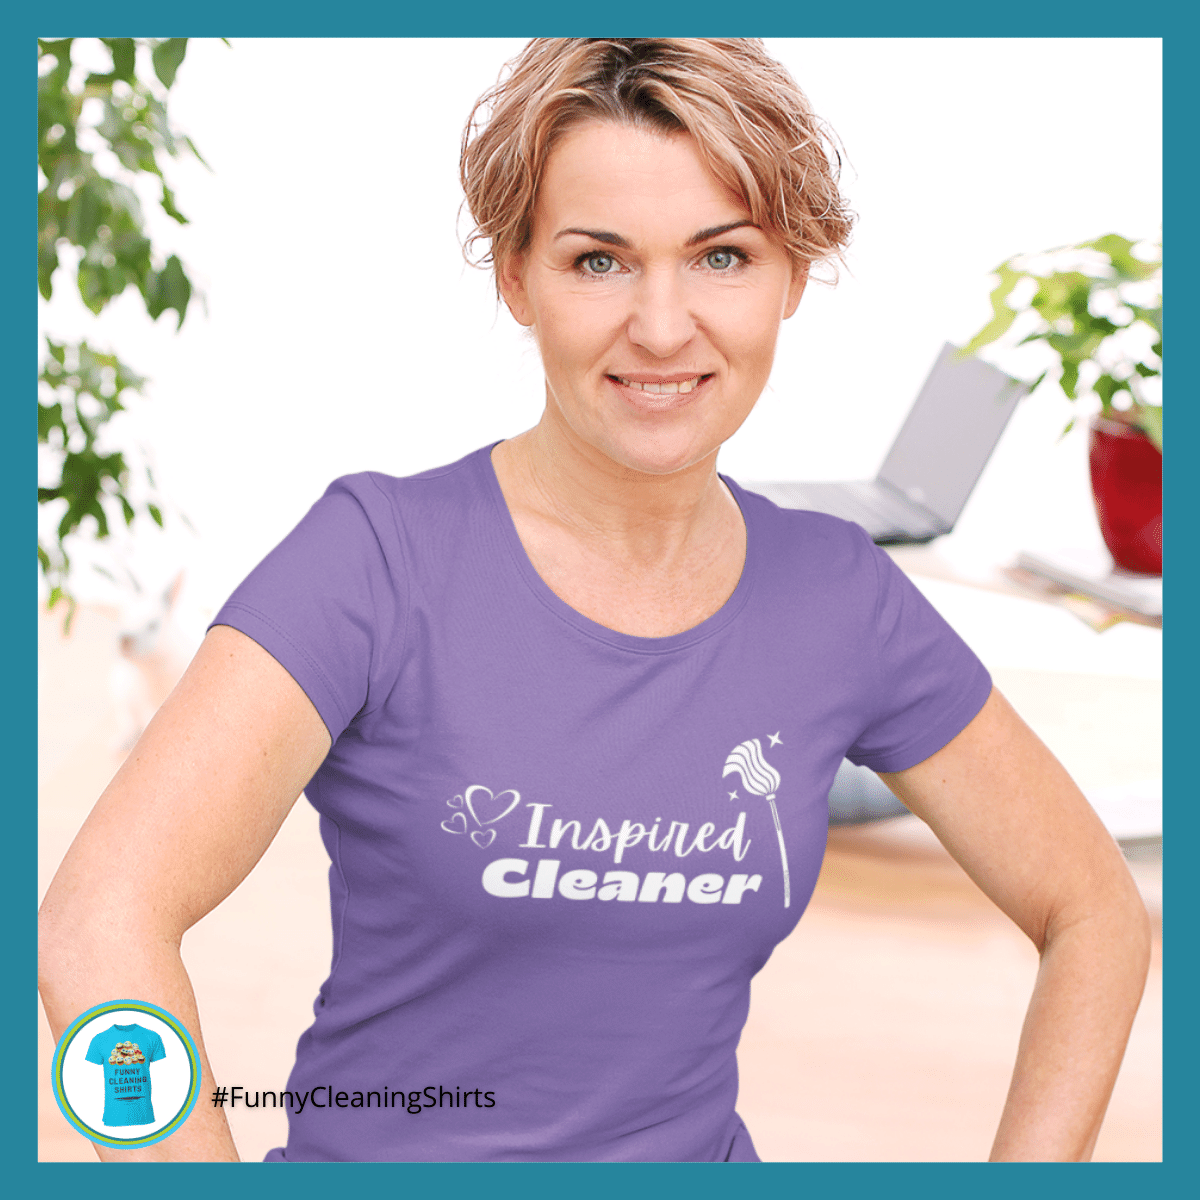 Inspires Cleaner Savvy Cleaner Funny Cleaning Shirts Standard Tee